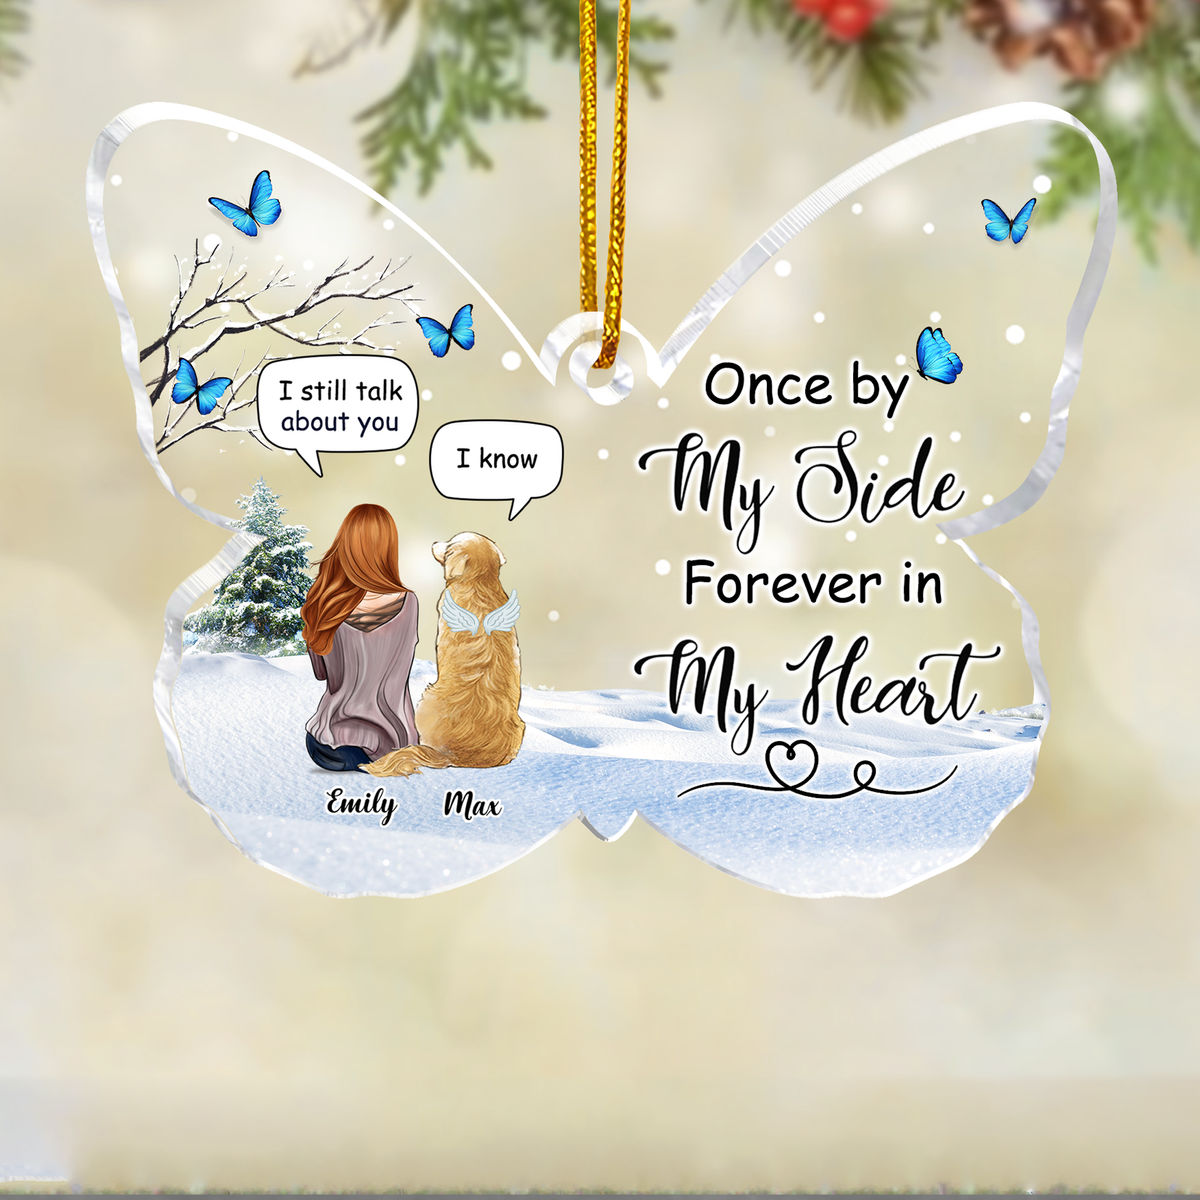 Transparent Ornament - Christmas Gift - Dog Lover - Once by my side forever in my heart (Custom Butterfly-Shaped Acrylic Ornament)